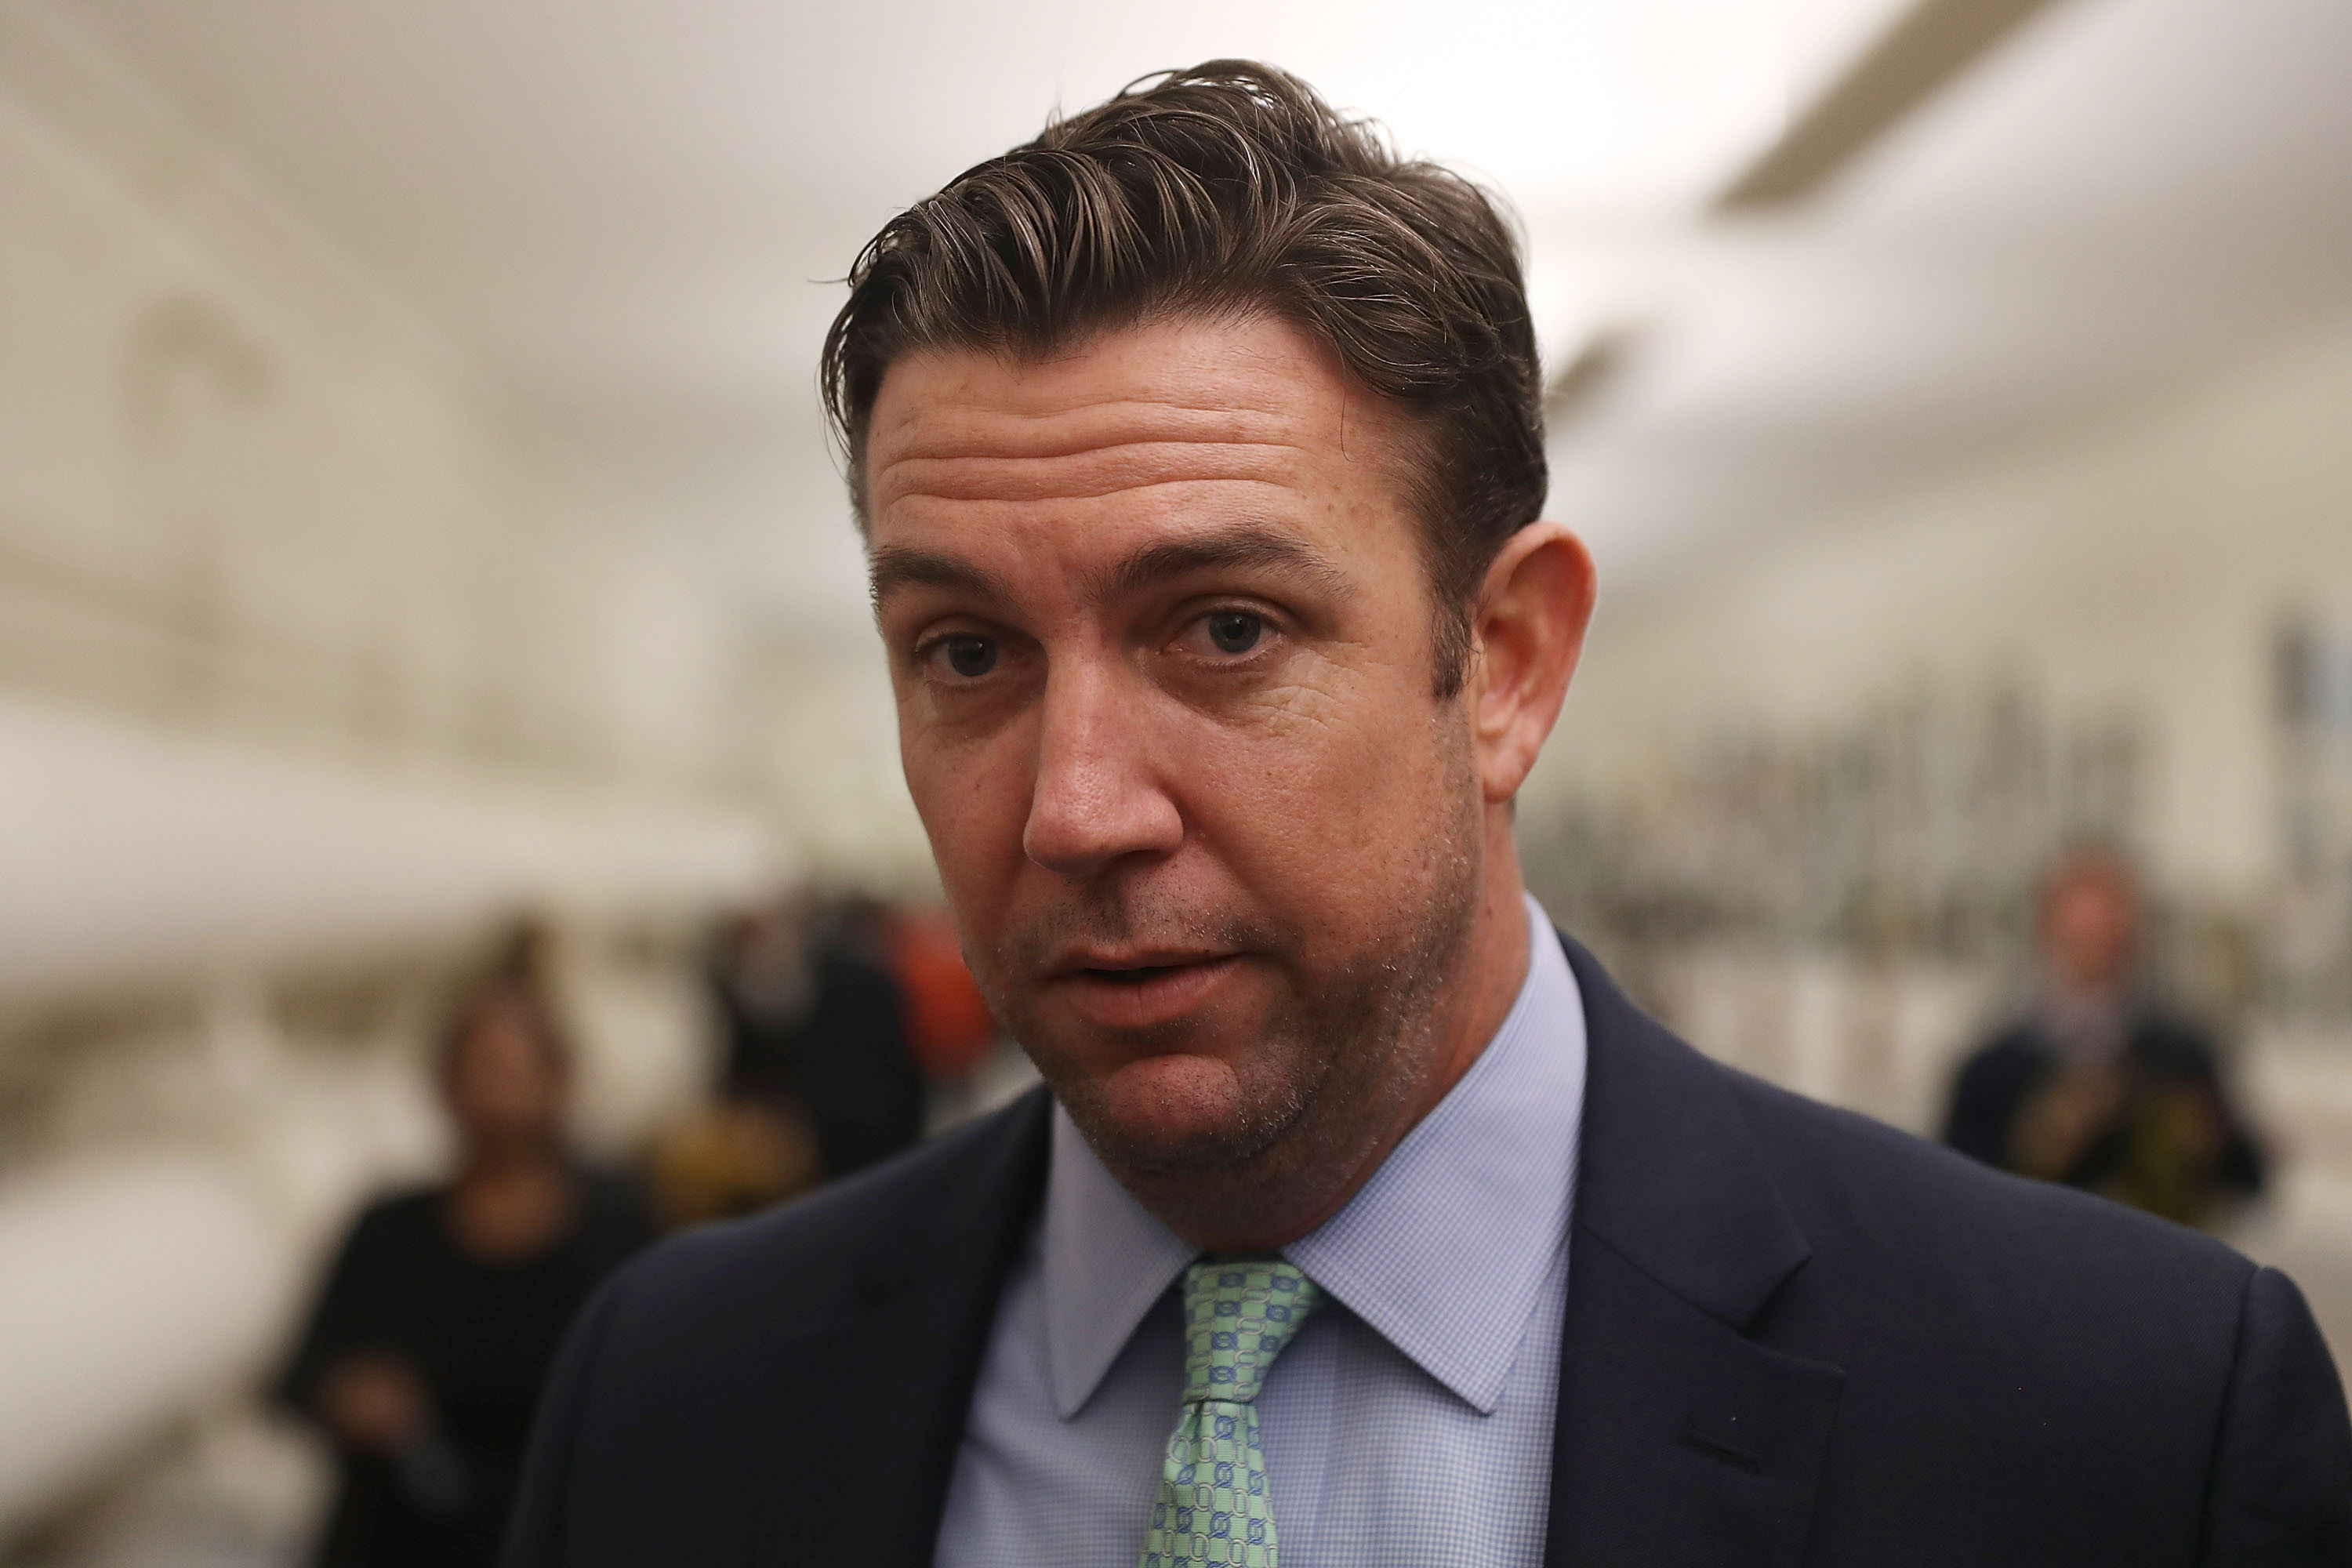 Rep. Duncan Hunter (R-CA) speaks to the media before a painting he found offensive and removed is rehung on the U.S. Capitol walls on January 10, 2017 in Washington, DC. (Joe Raedle&mdash;Getty Images)